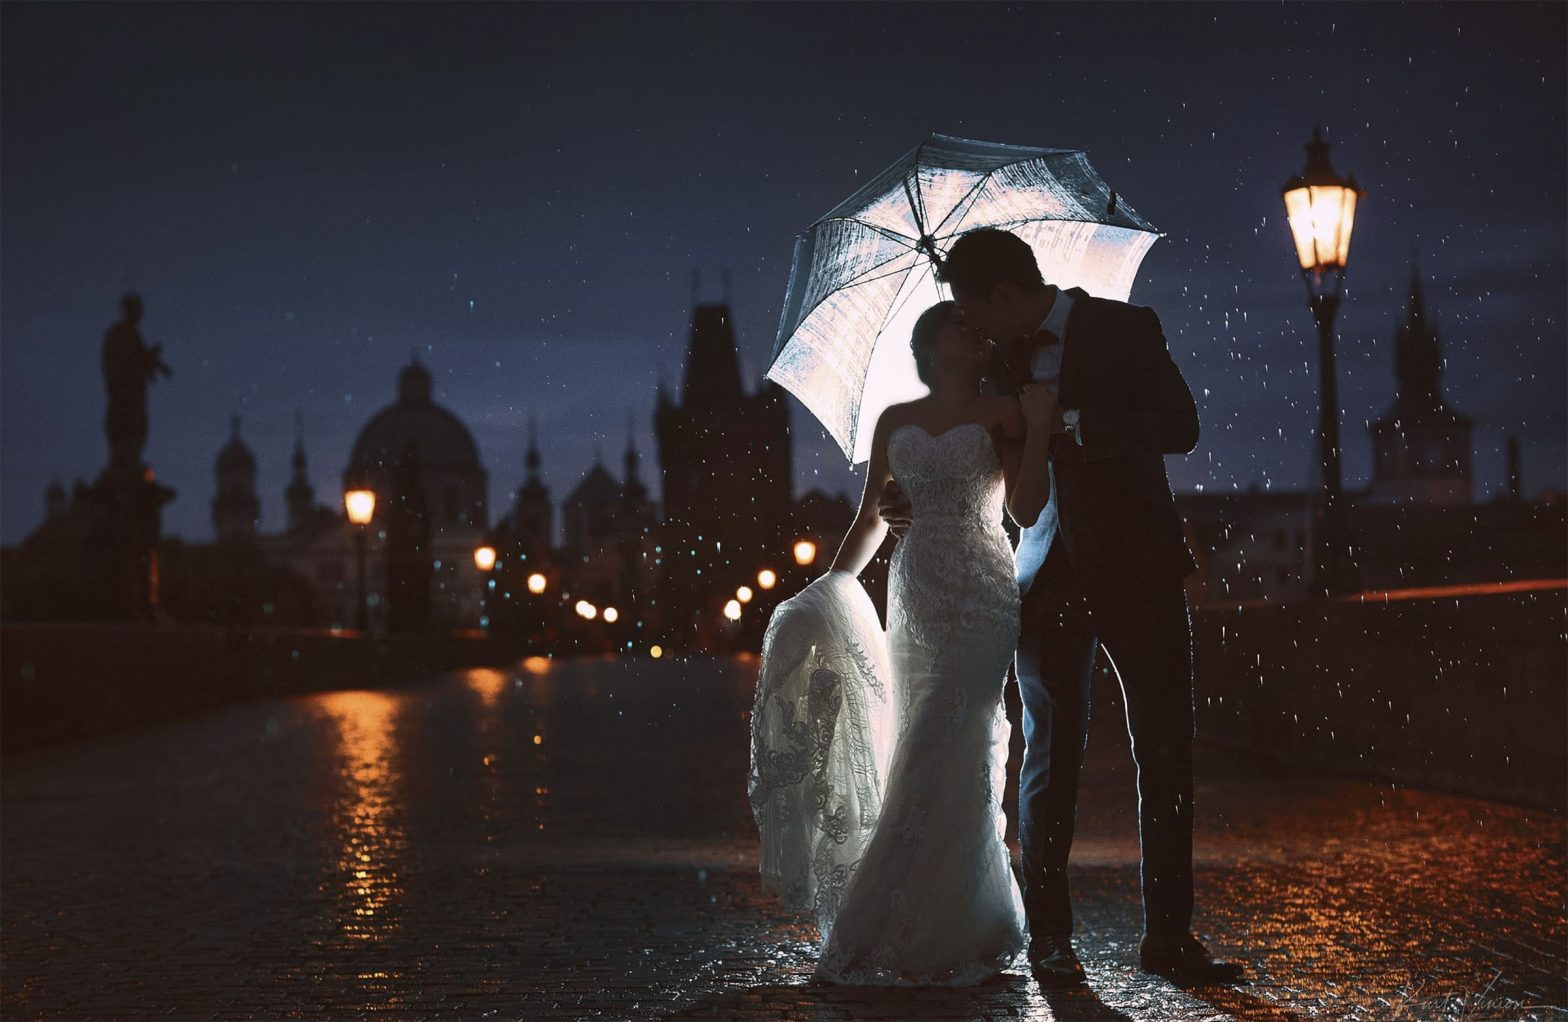 As the rain pours around them, a bride & groom are silhouetted against the night skyline of the Charles Bridge in Prague.